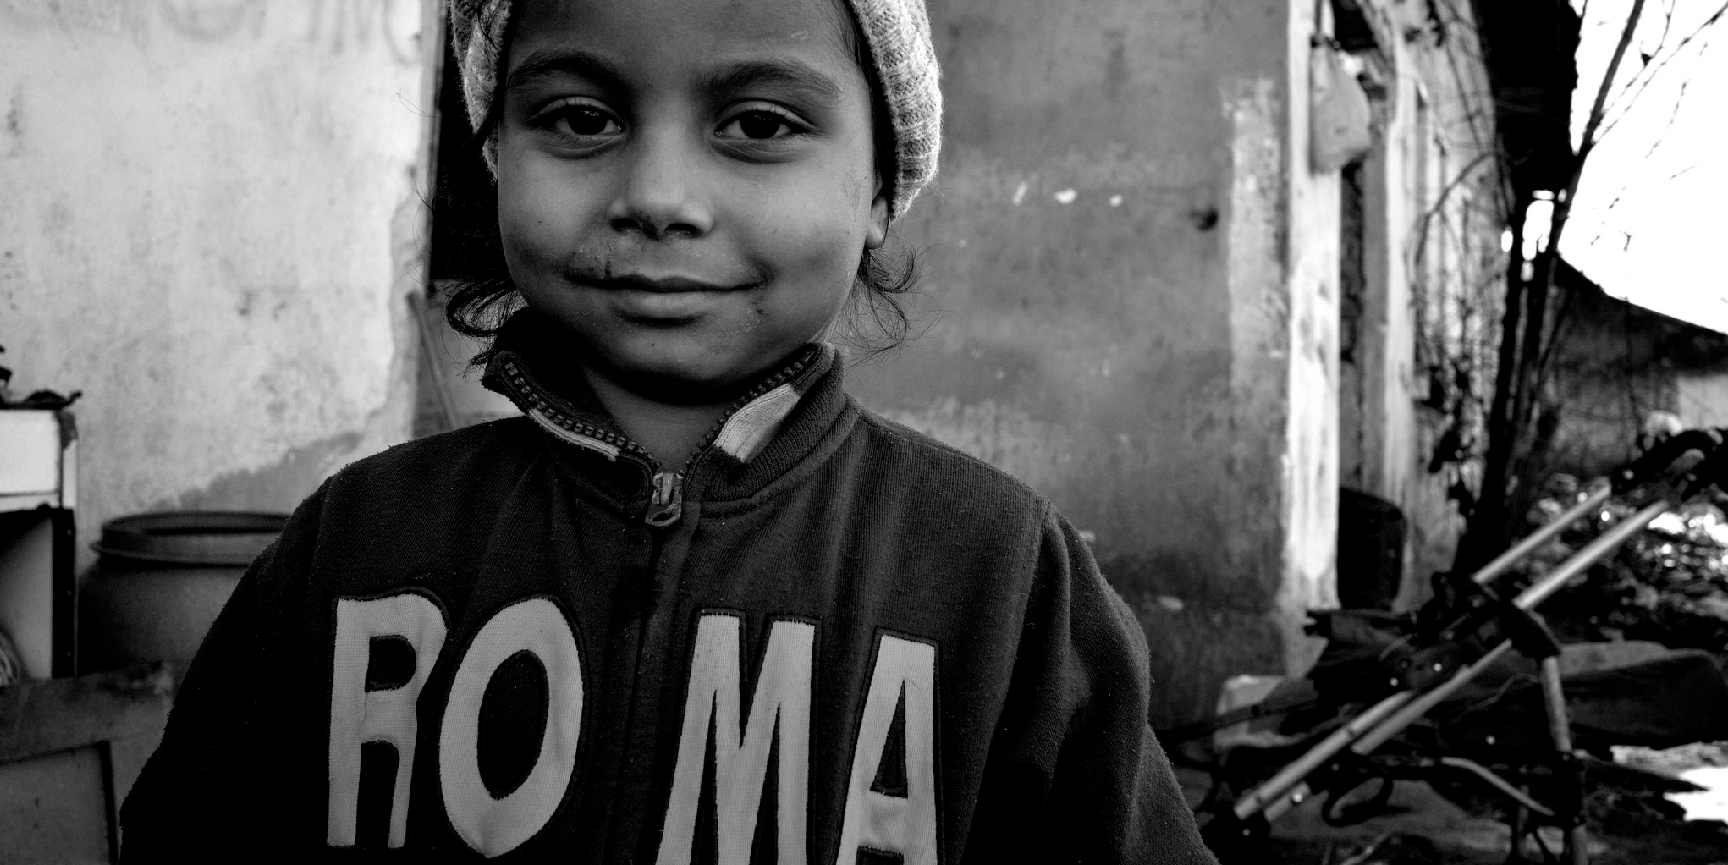 A young Roma girl in a sweater which reads “ROMA”